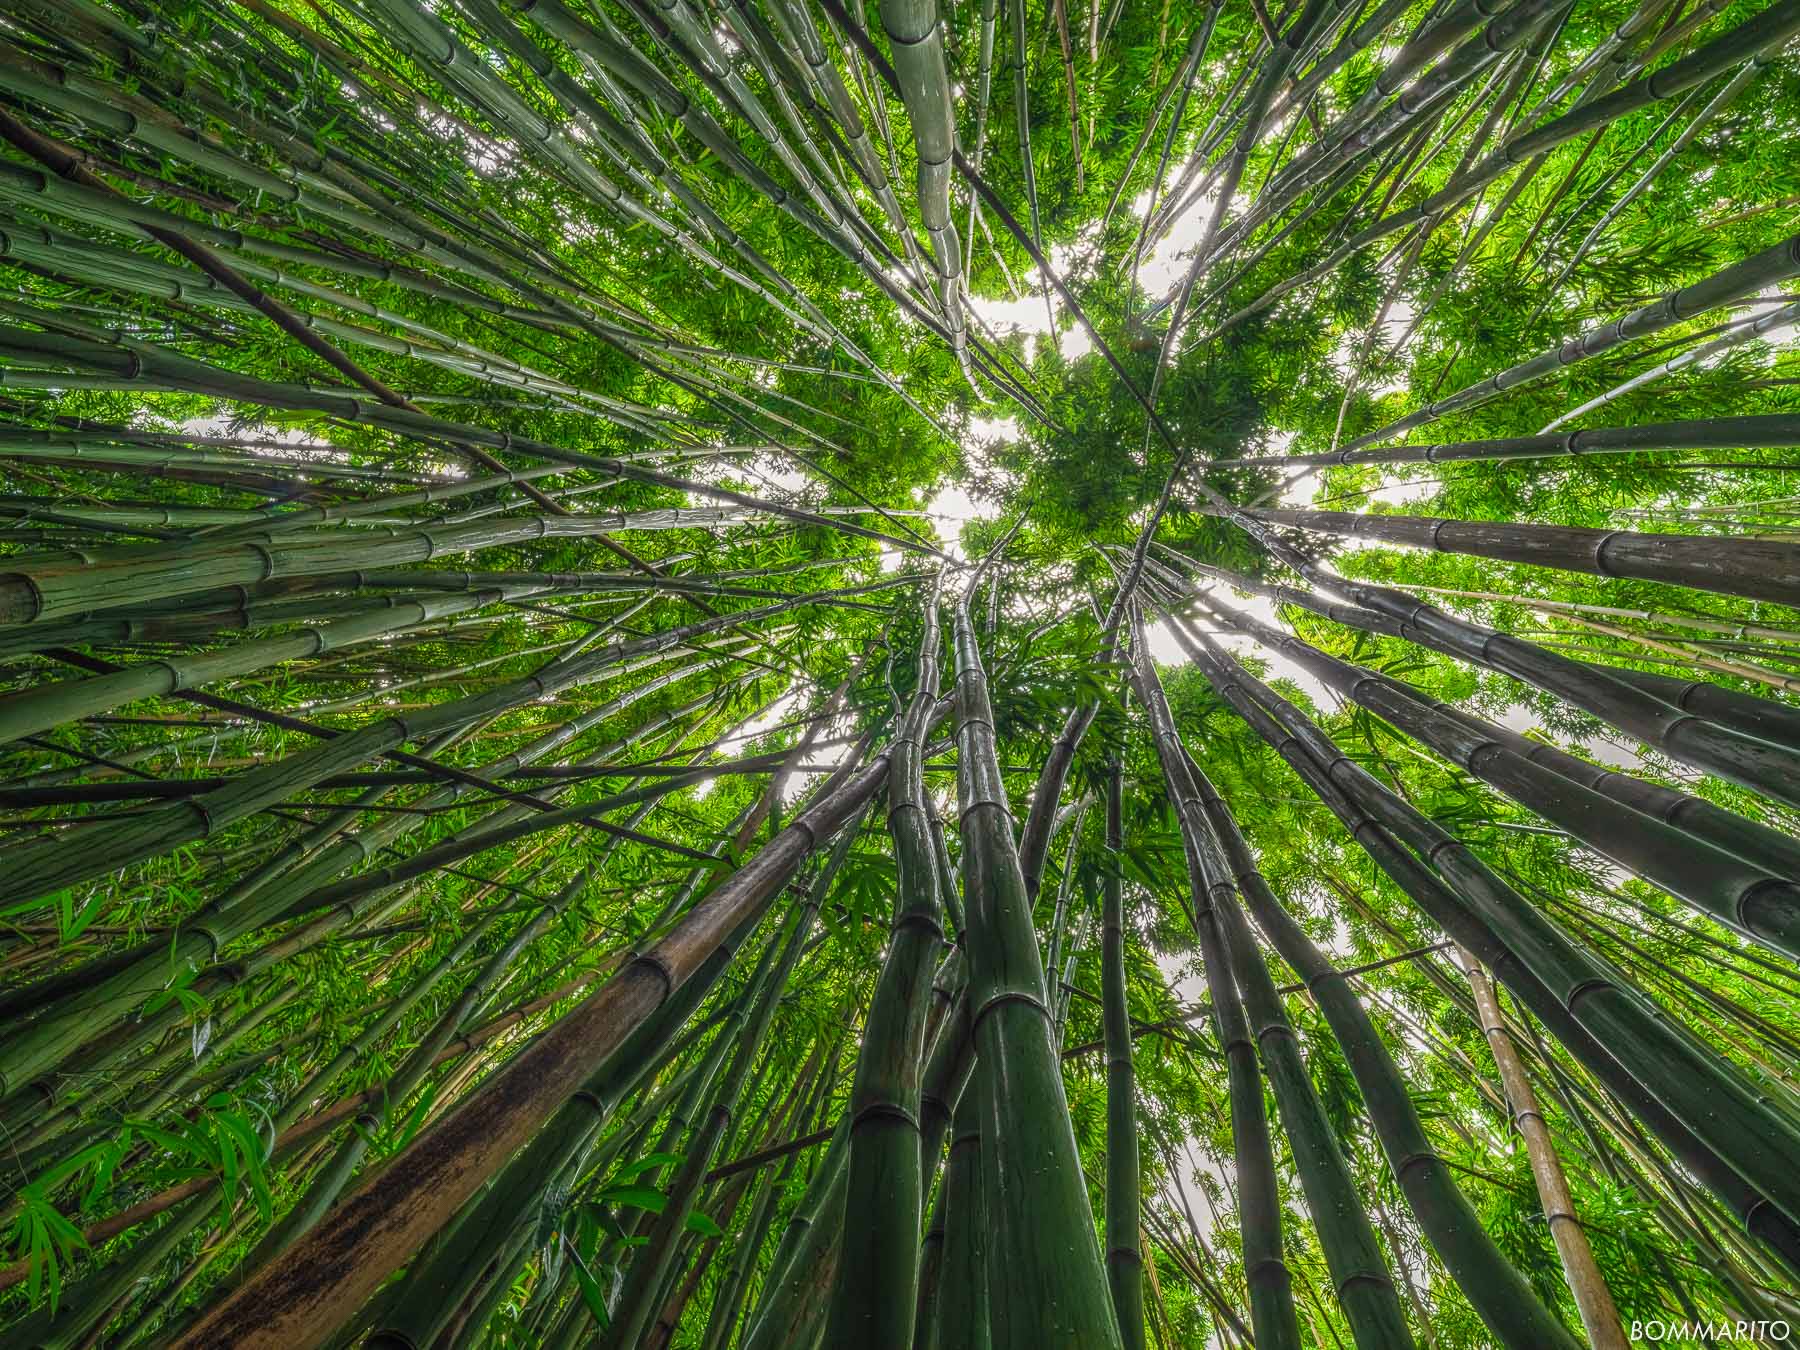 Forest of Bamboo